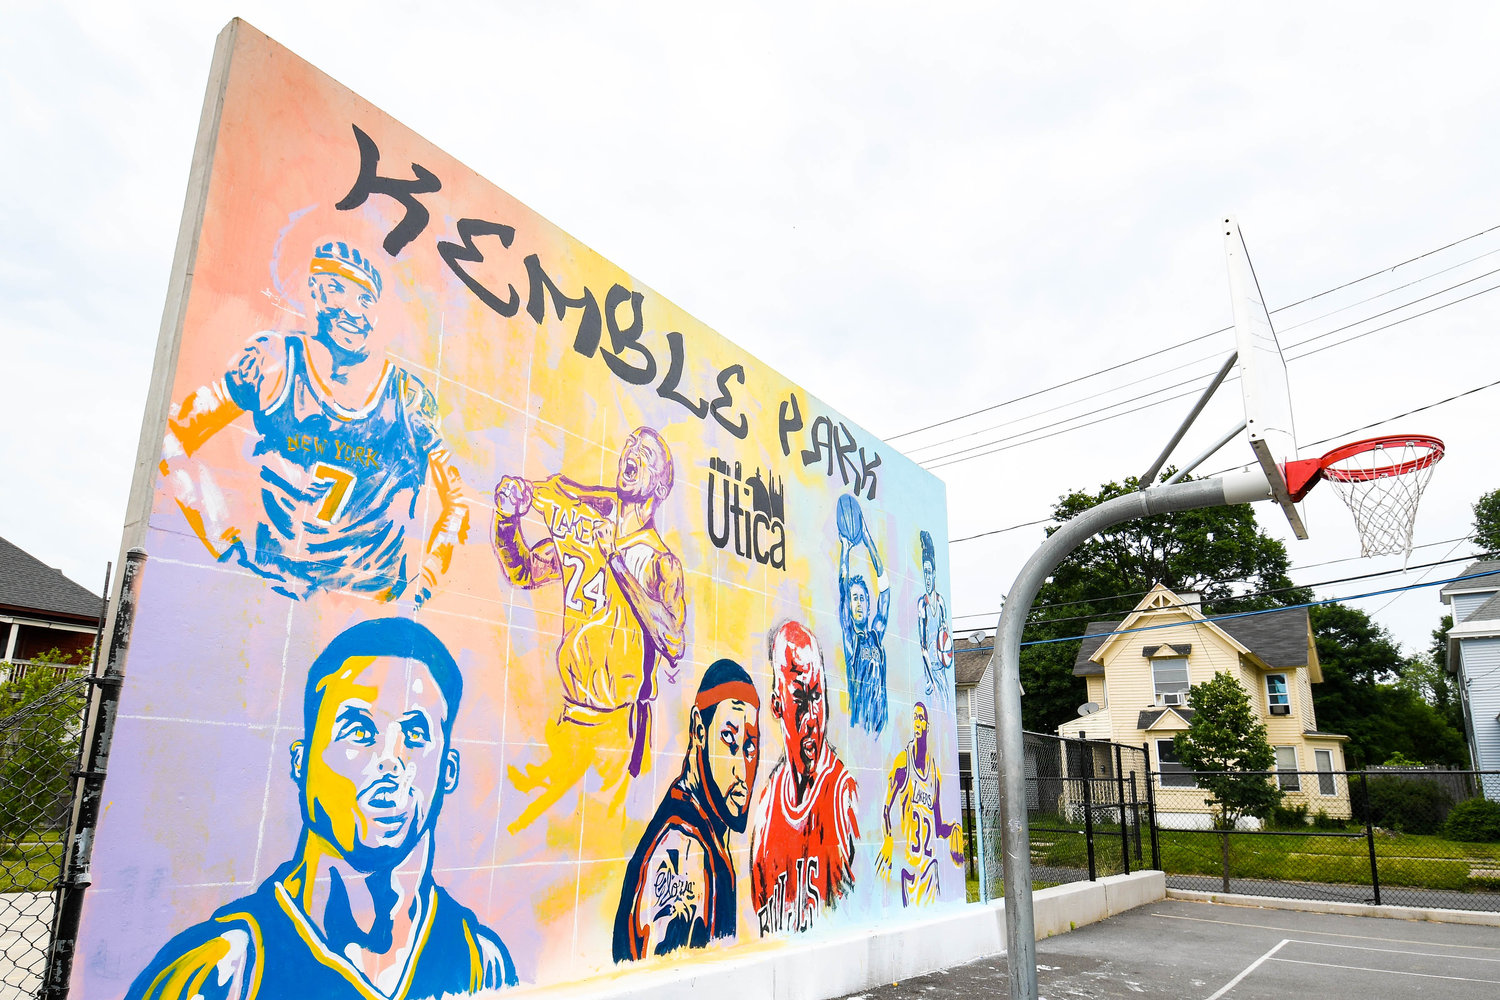 PARK MURAL — A new basketball mural featuring NBA and WNBA stars, such as Kobe Bryant and local star Brianna Kiesel, was painted near the basketball courts at Kemble Park in Utica by city codes director Marques Phillips. Each city councilperson was given money to upgrade areas in their respective districts and Councilman Venice Ervin decided to use a large portion on the park, with the mural being the first upgrade. Ervin talked with kids at the park to see who they would want on the wall and Phillips came up with the design and painted the image. New grills, seating and a performance stage is also planned for future additions to the park.